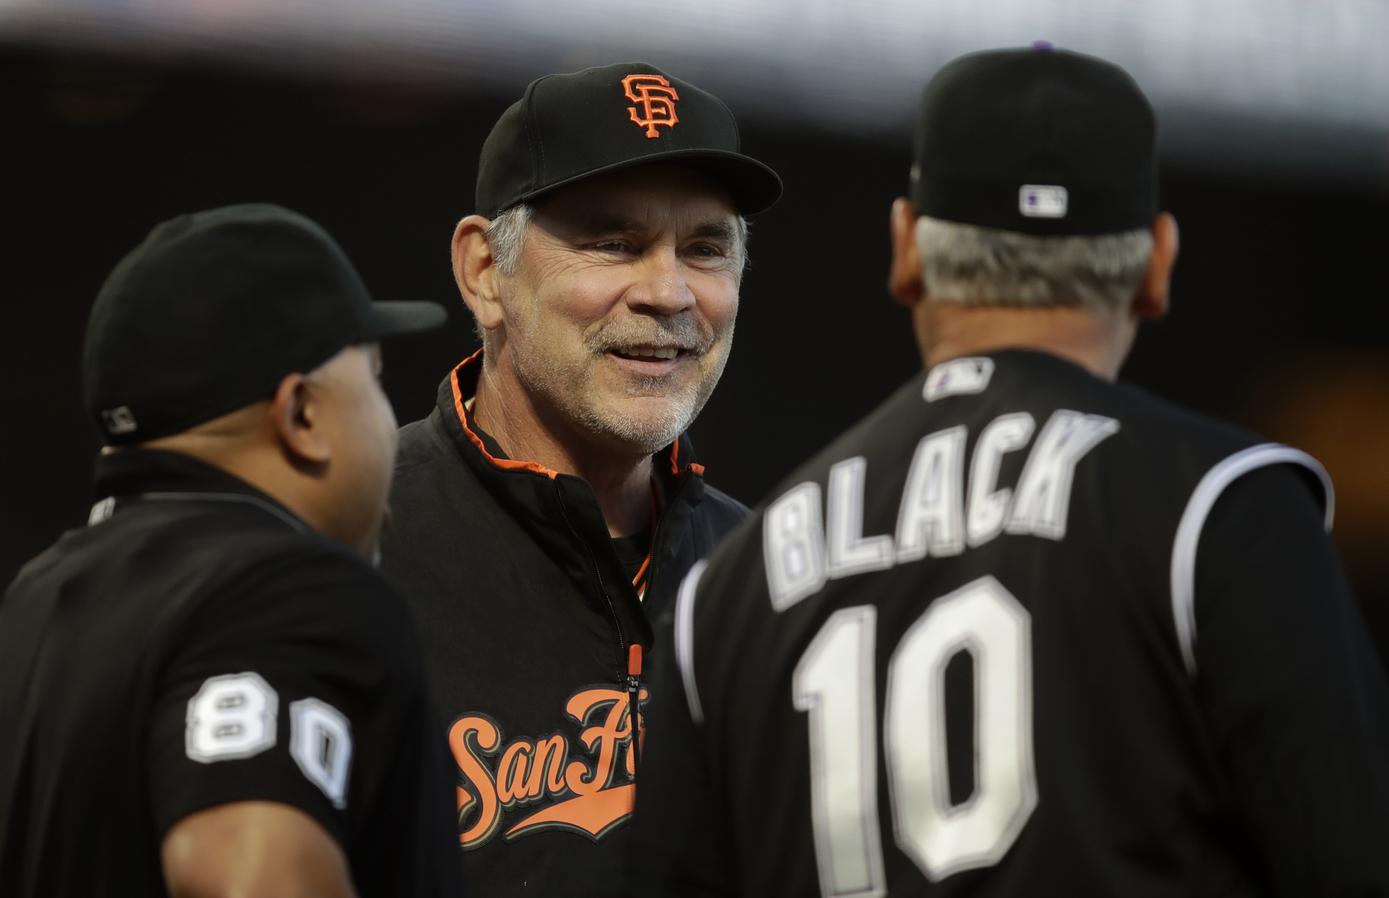 Bruce Bochy is retiring after the 2019 season, and his next stop will be  the Baseball Hall of Fame 